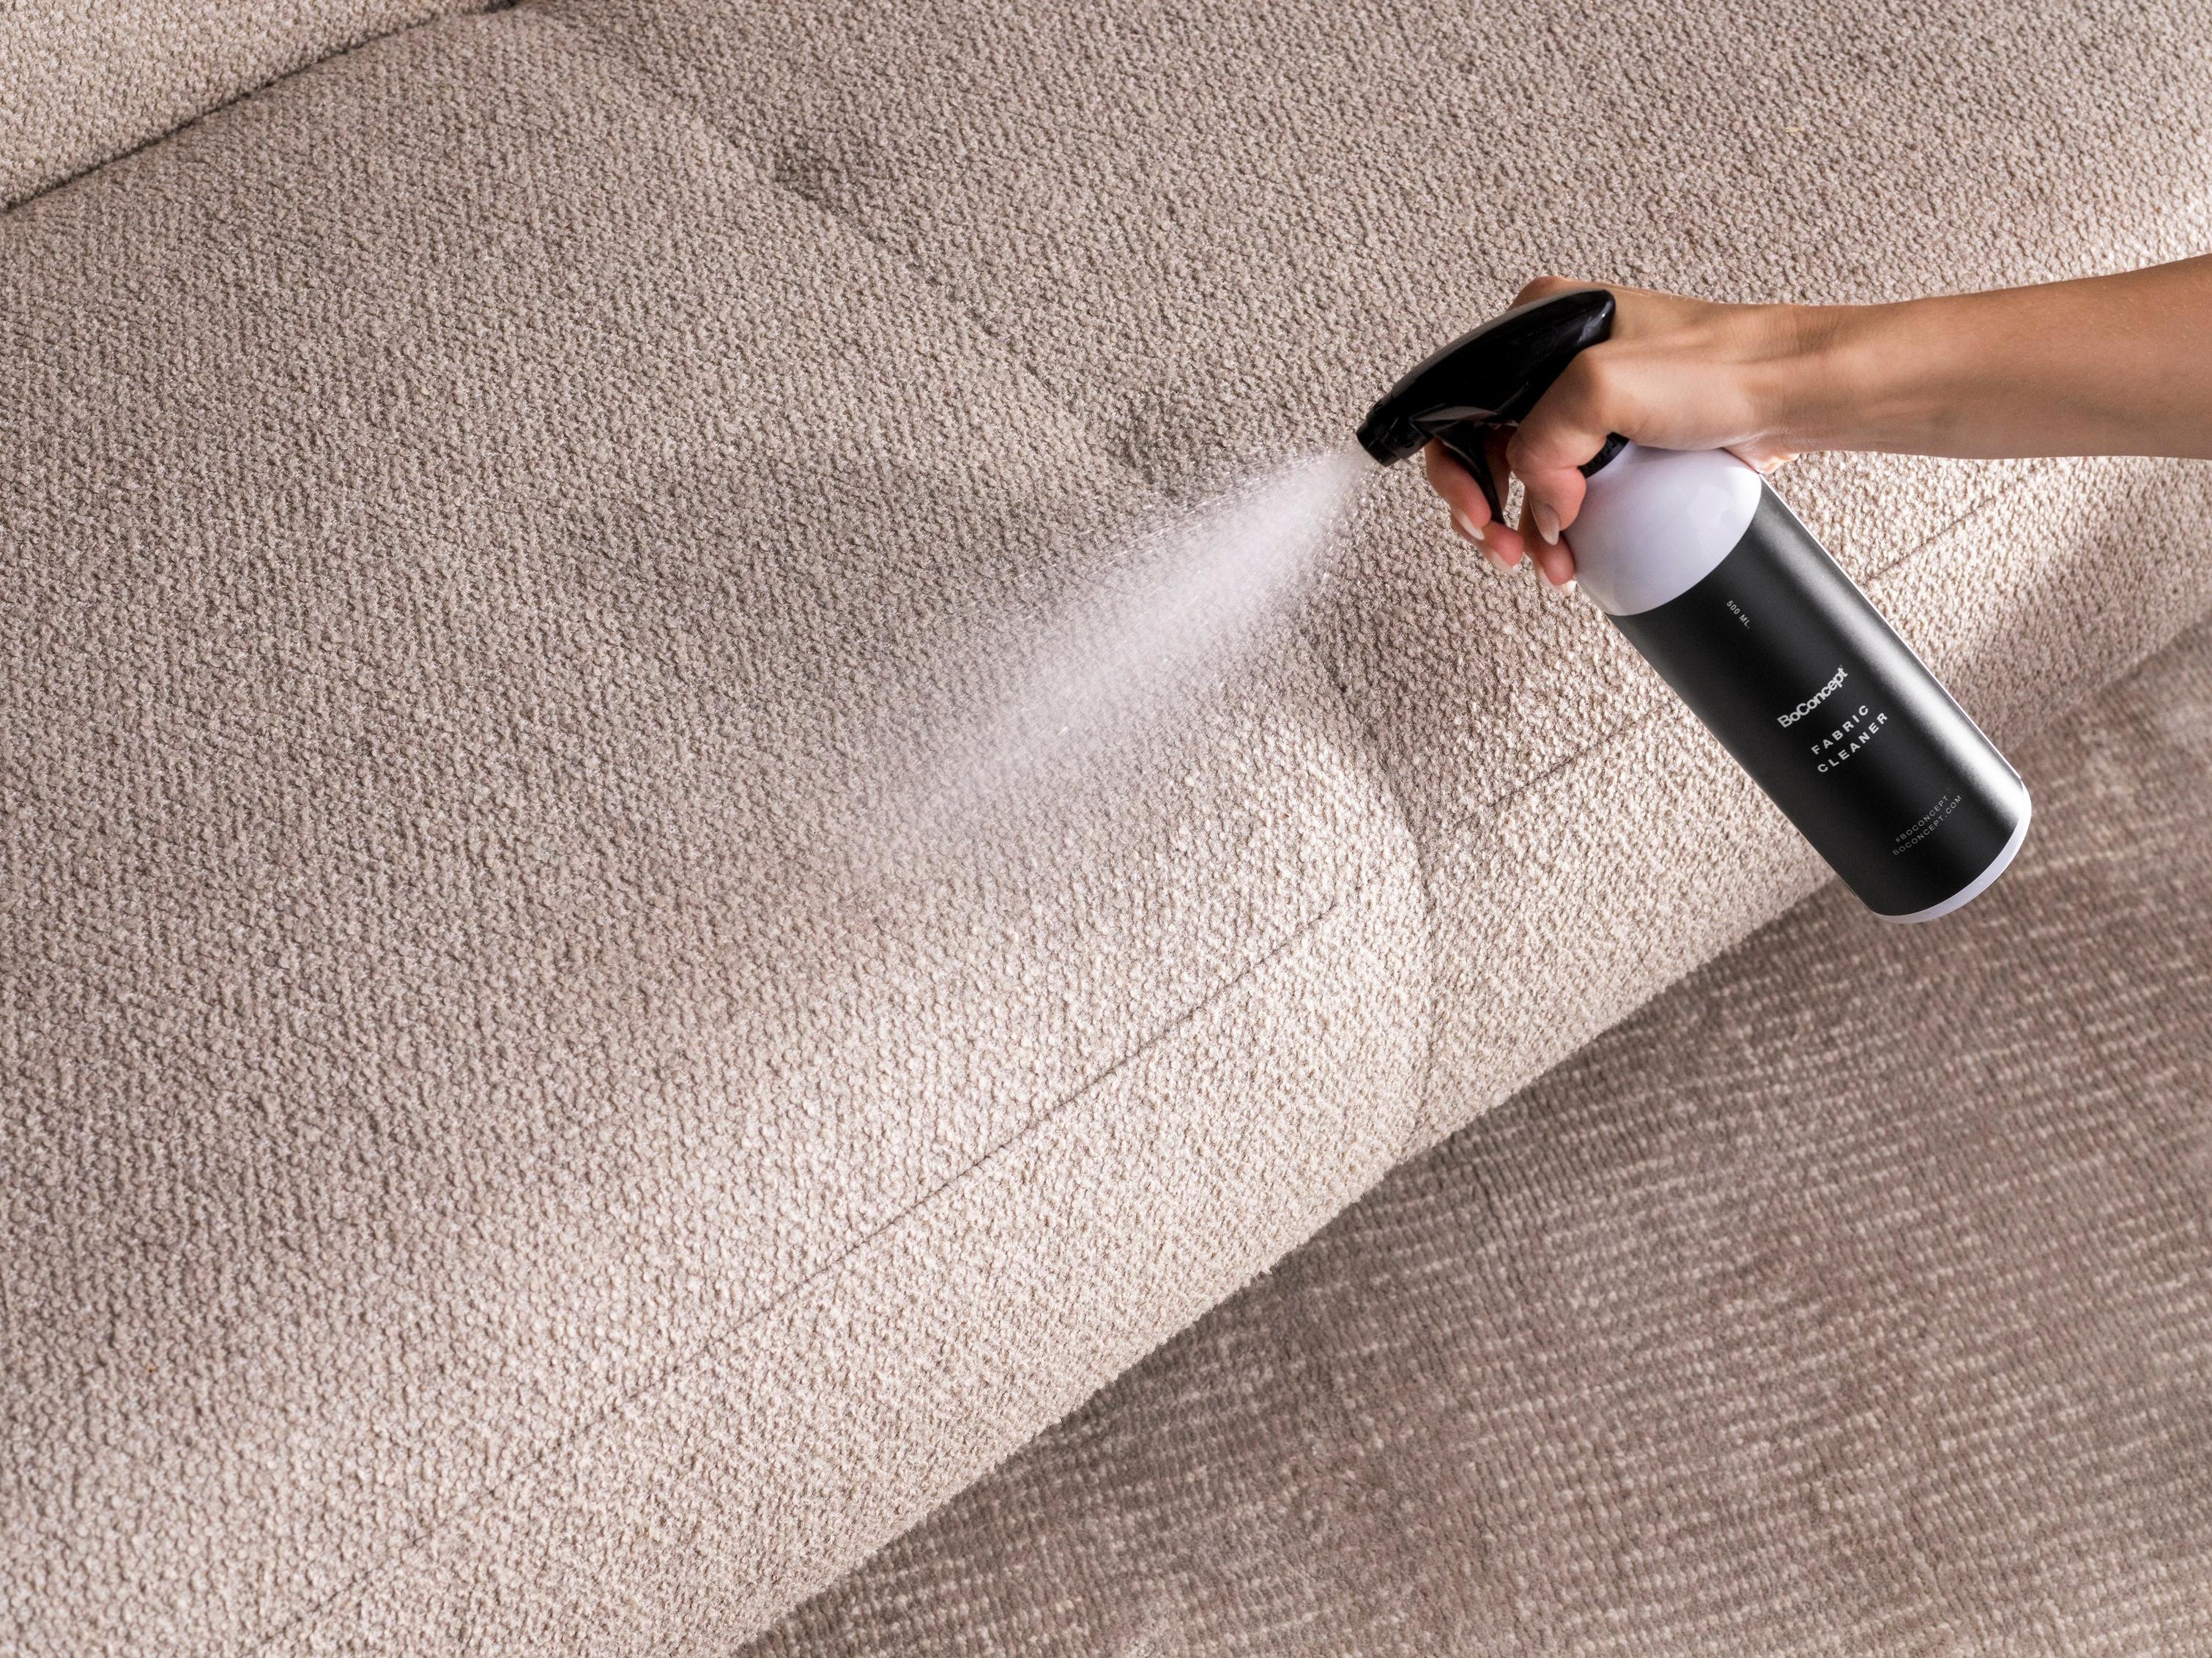 BoConcept fabric care spray applied to a beige surface